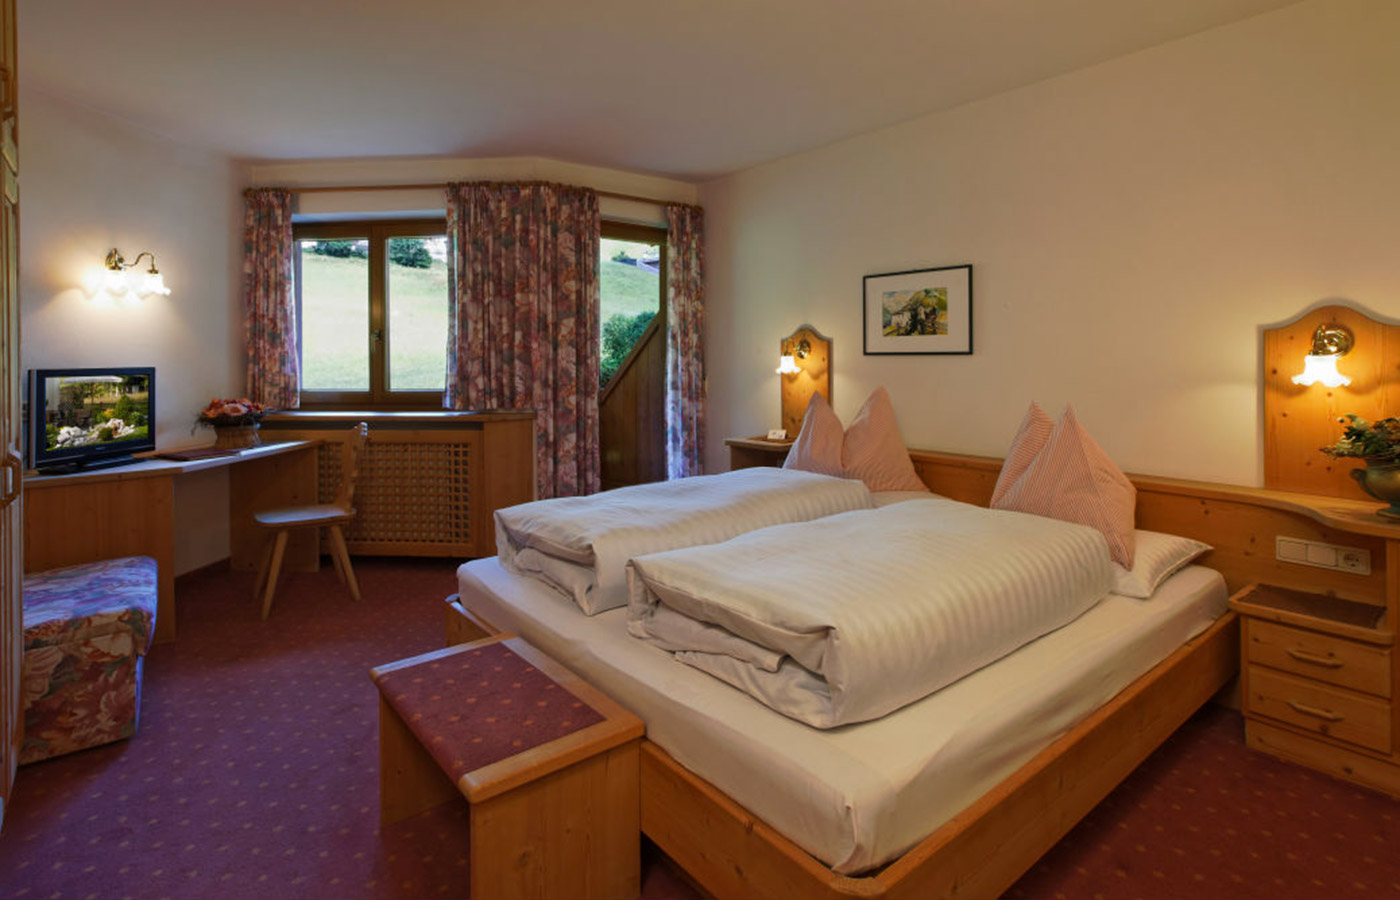 Double room at Garnì Raetia with TV and door to a balcony